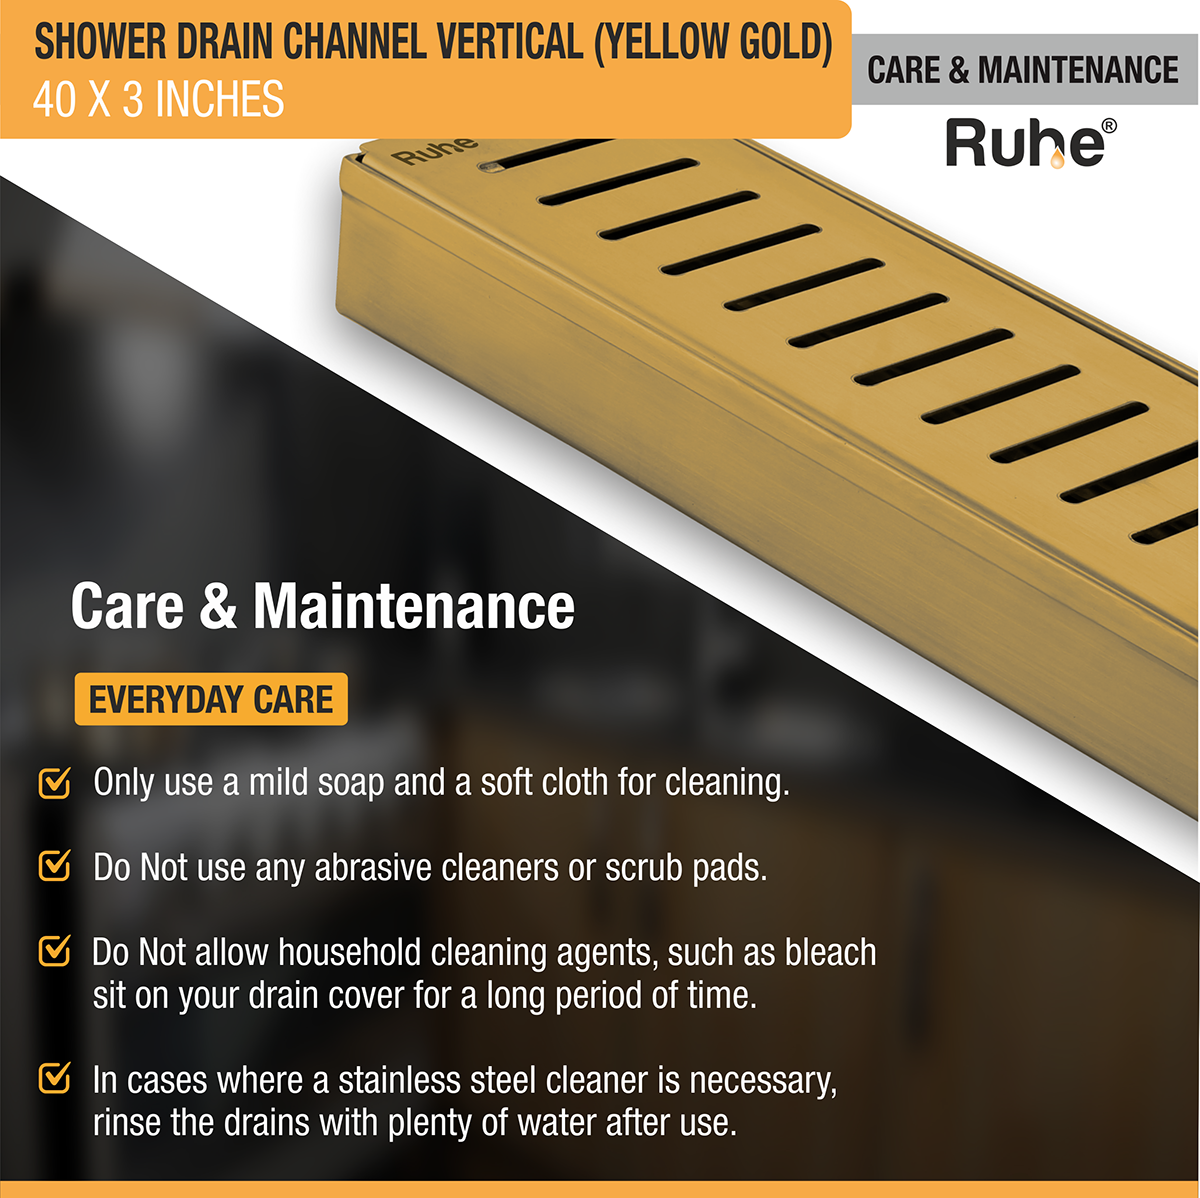 Vertical Shower Drain Channel (40 x 3 Inches) YELLOW GOLD care and maintenance